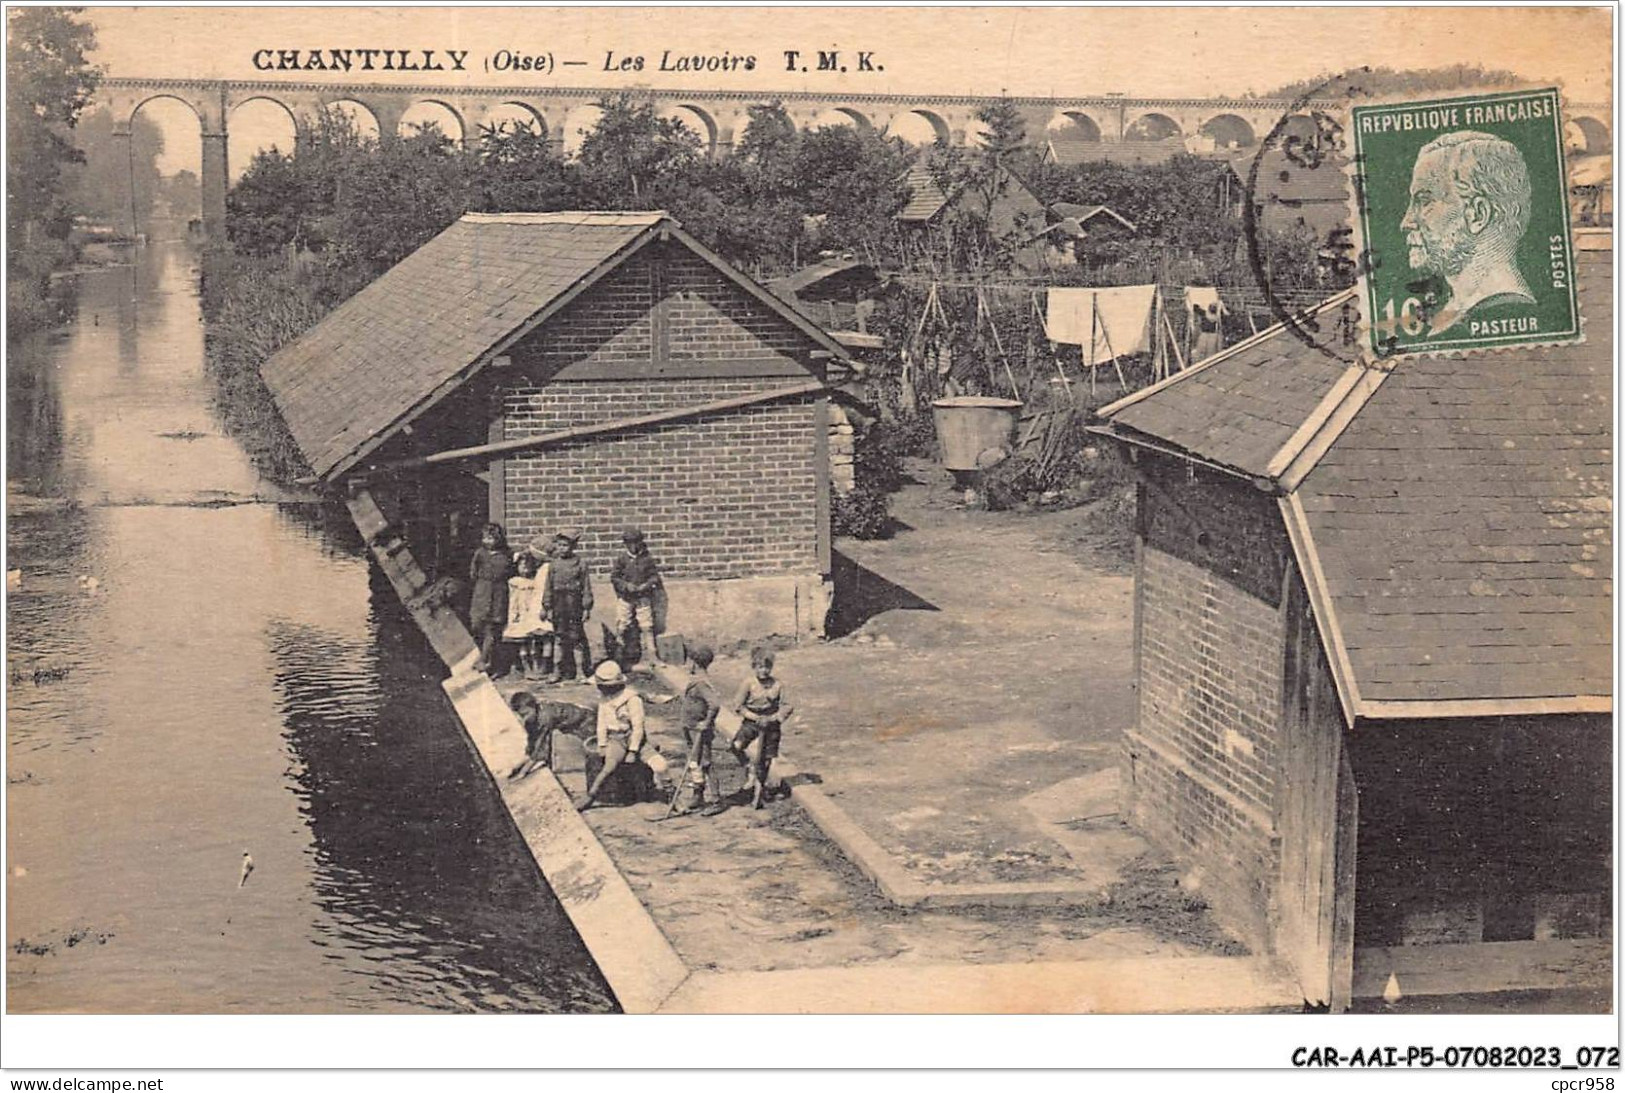 CAR-AAIP5-60-0412 - CHANTILLY - Les Lavoirs - Chantilly